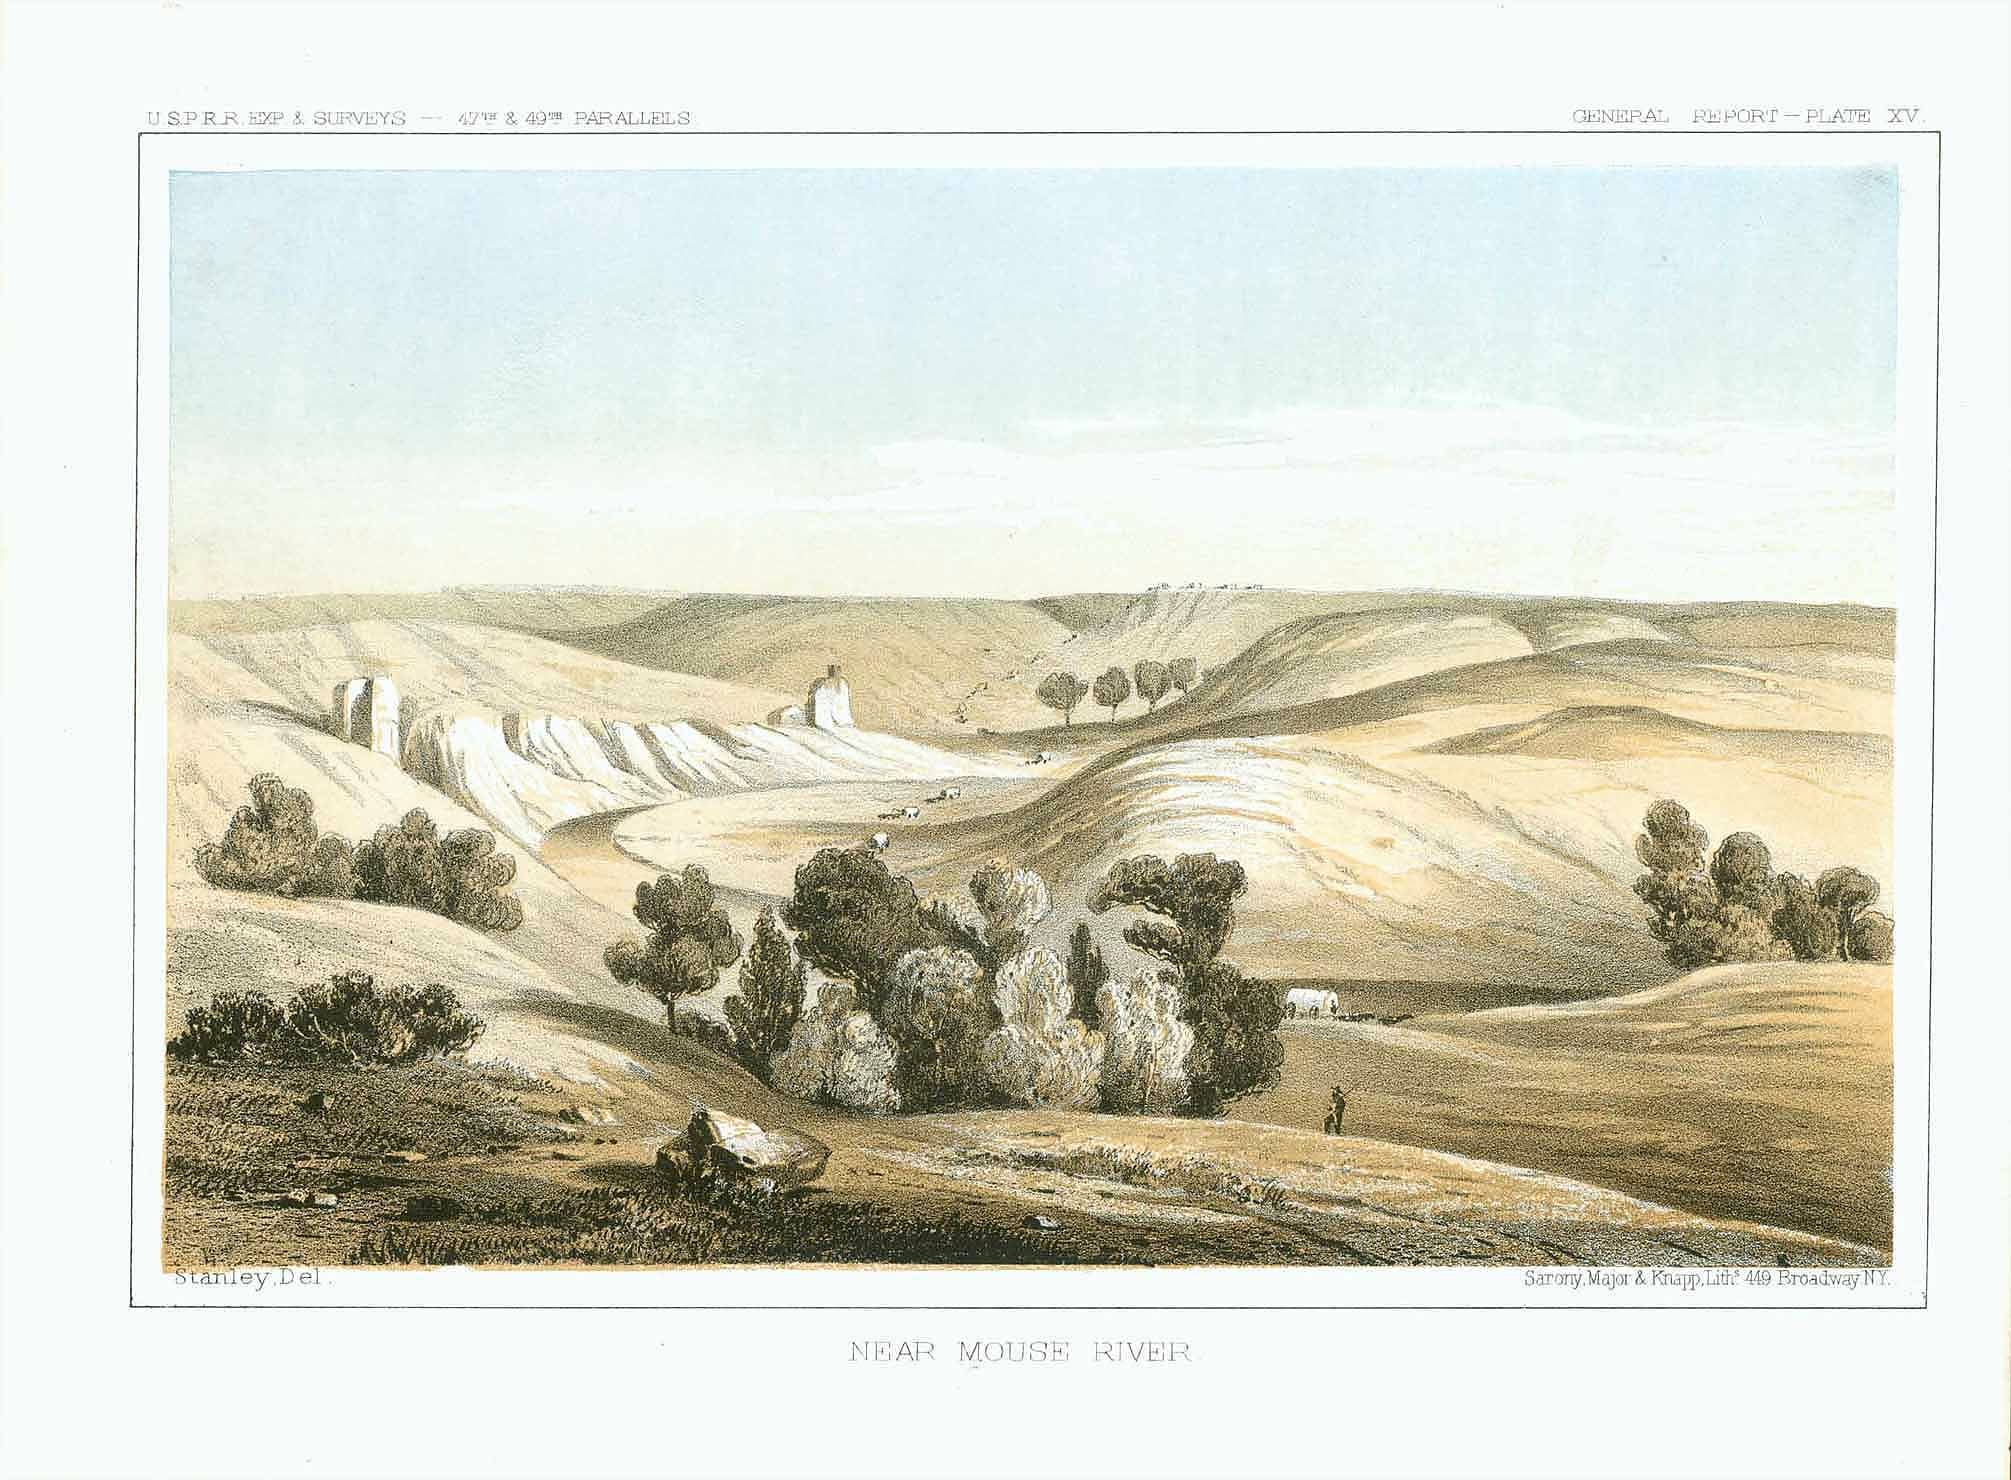 Lithograghs from the U.S.P.R.R. Exp. & Survey (United States Pacific Rail Road Expedition and Survey)  Enjoy looking at some of the most artisic and documentary prints made of the American West. These original hand-colored lithographs were made in the 1850s by a group of naturalists and artists who travelled with the expedition surveying the West for the U.S. Pacific Railroad. These prints were published as part of the official government report.   "Near Mouse River" (Souris River)